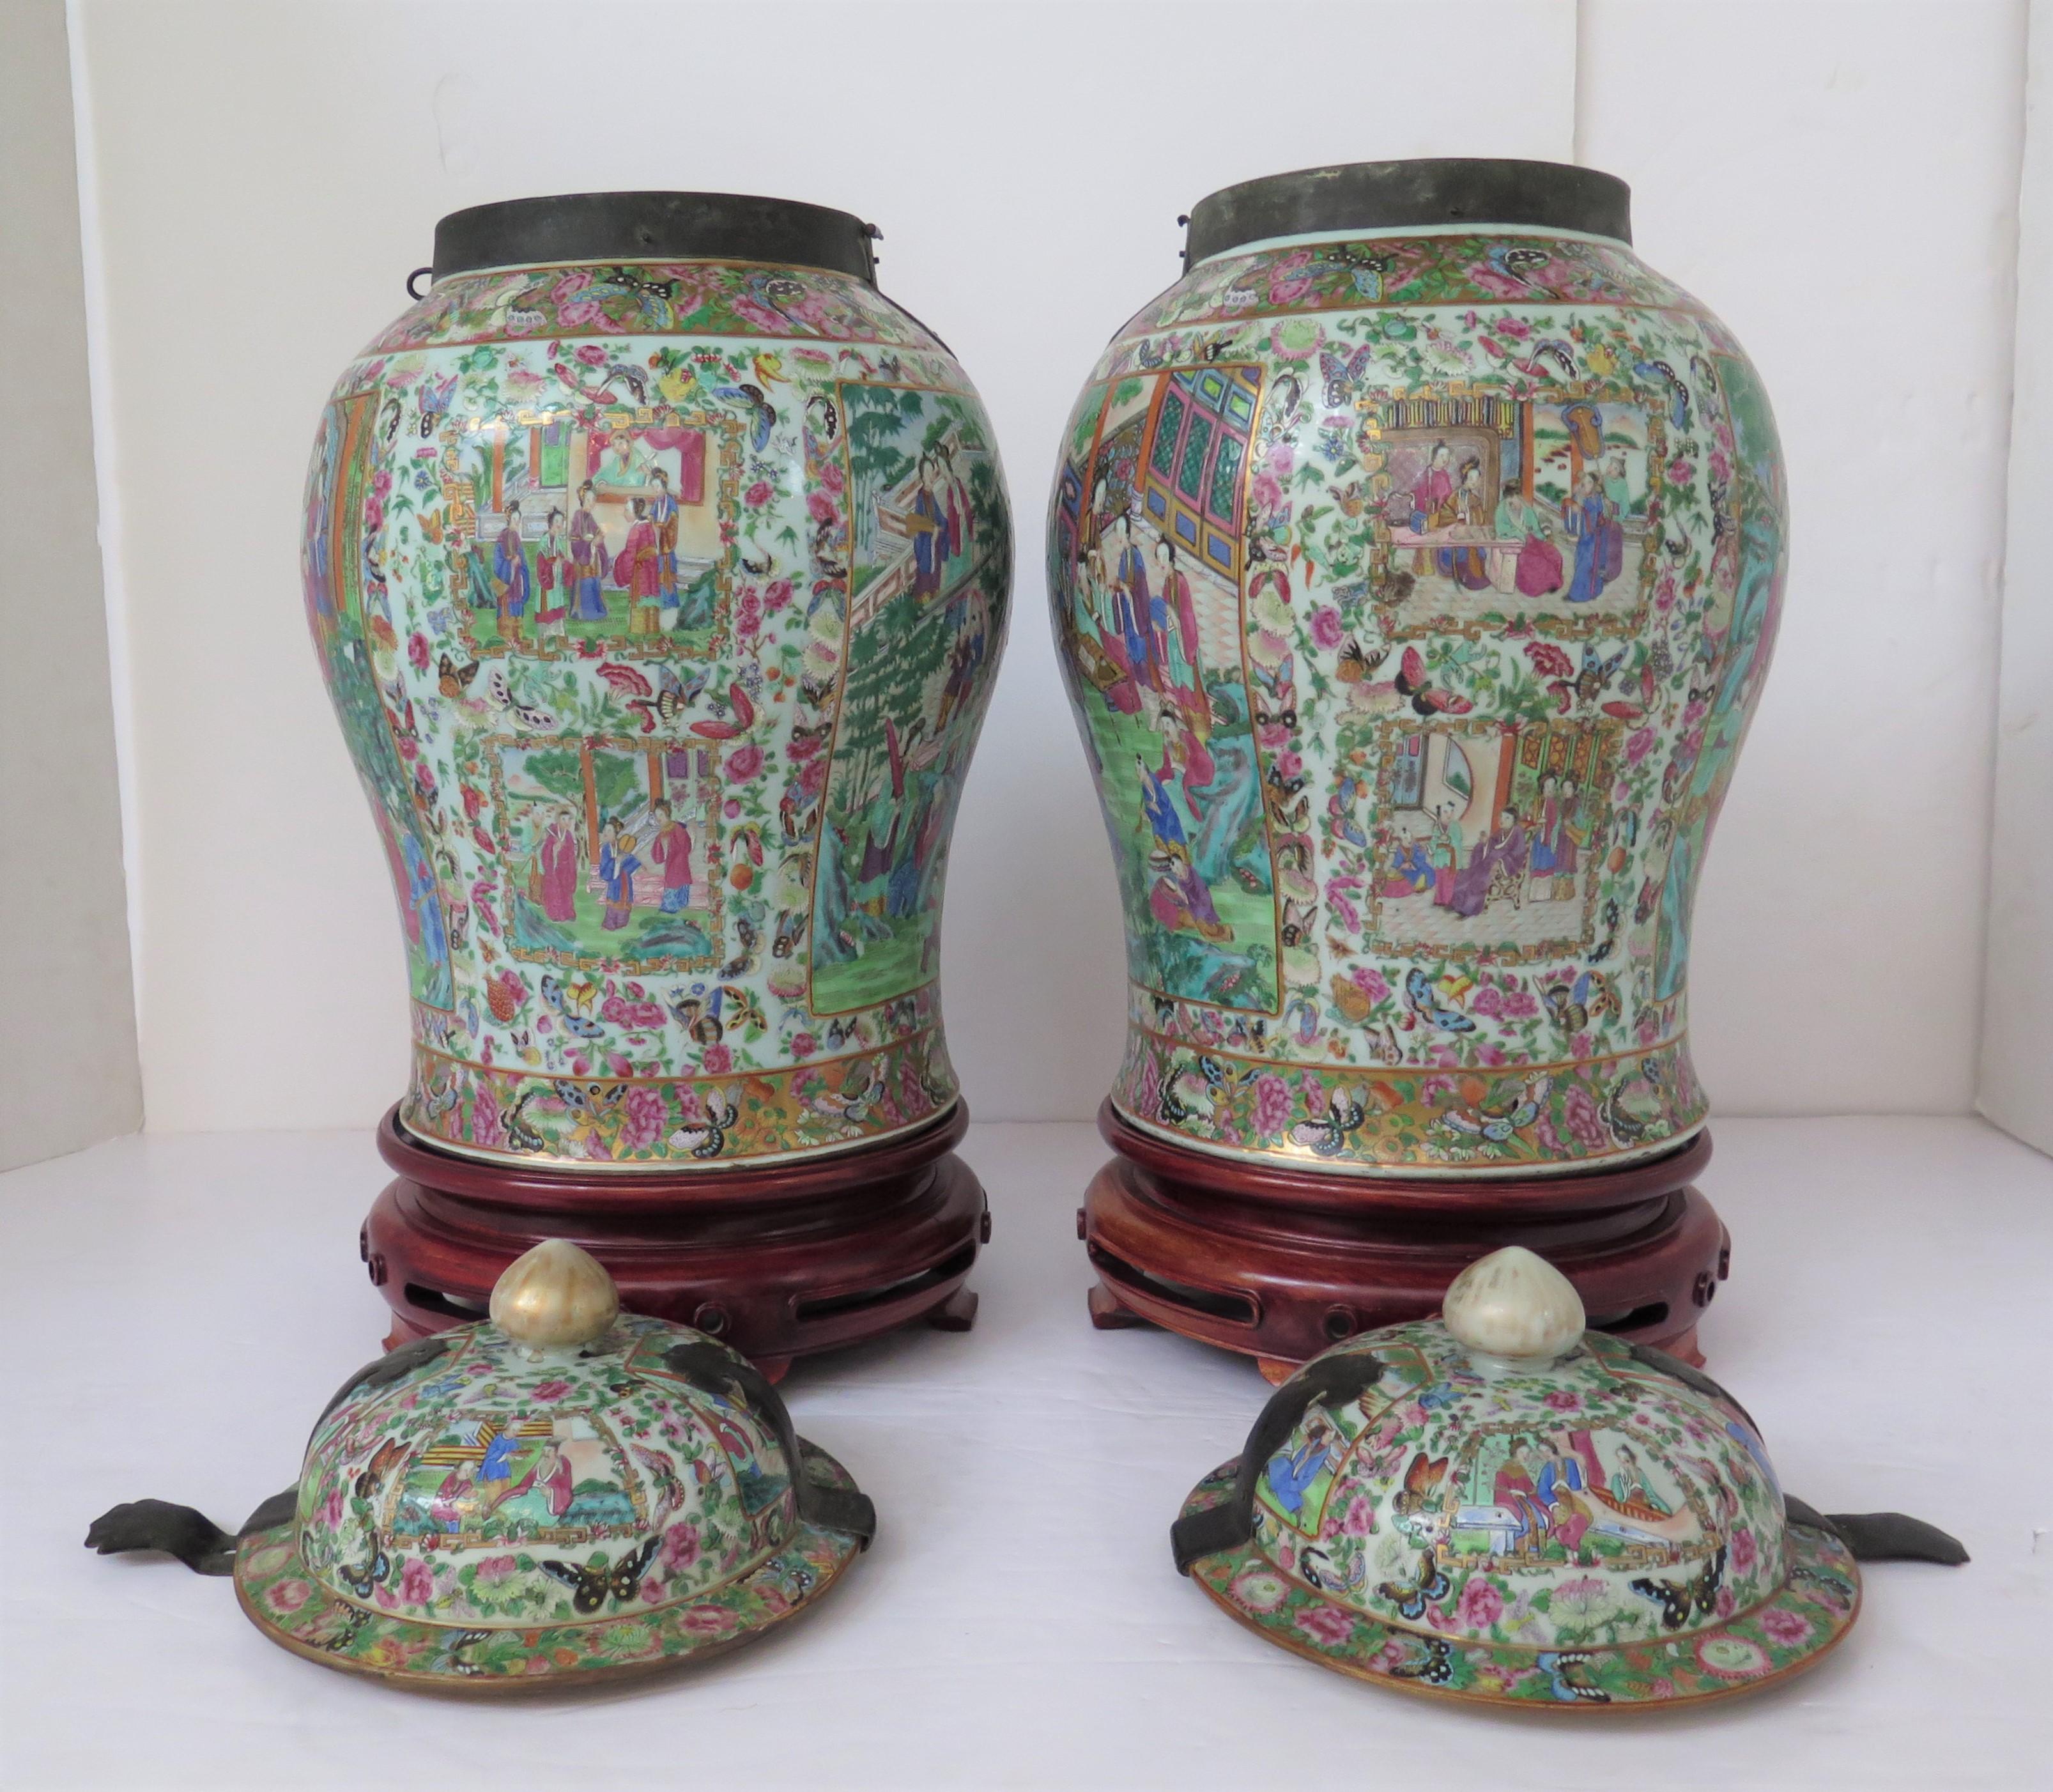 A Pair of Late 18th-Early 19th Century Chinese Lidded Jars  For Sale 2